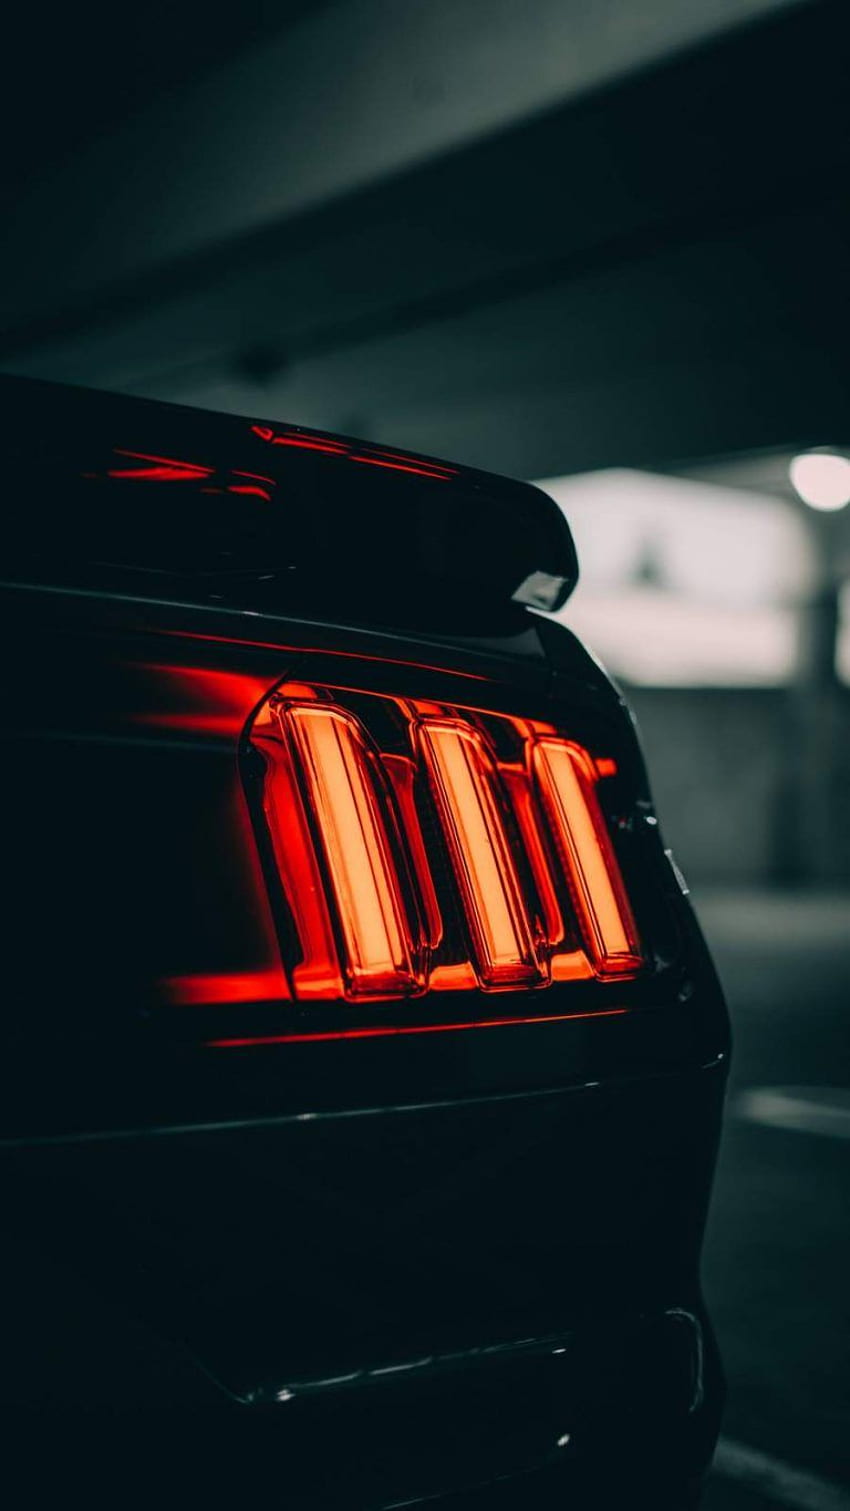 BMW Auto IPhone IPhone : IPhone . Ford Mustang, Mustang Iphone, Mustang, dunkler Mustang HD-Handy-Hintergrundbild